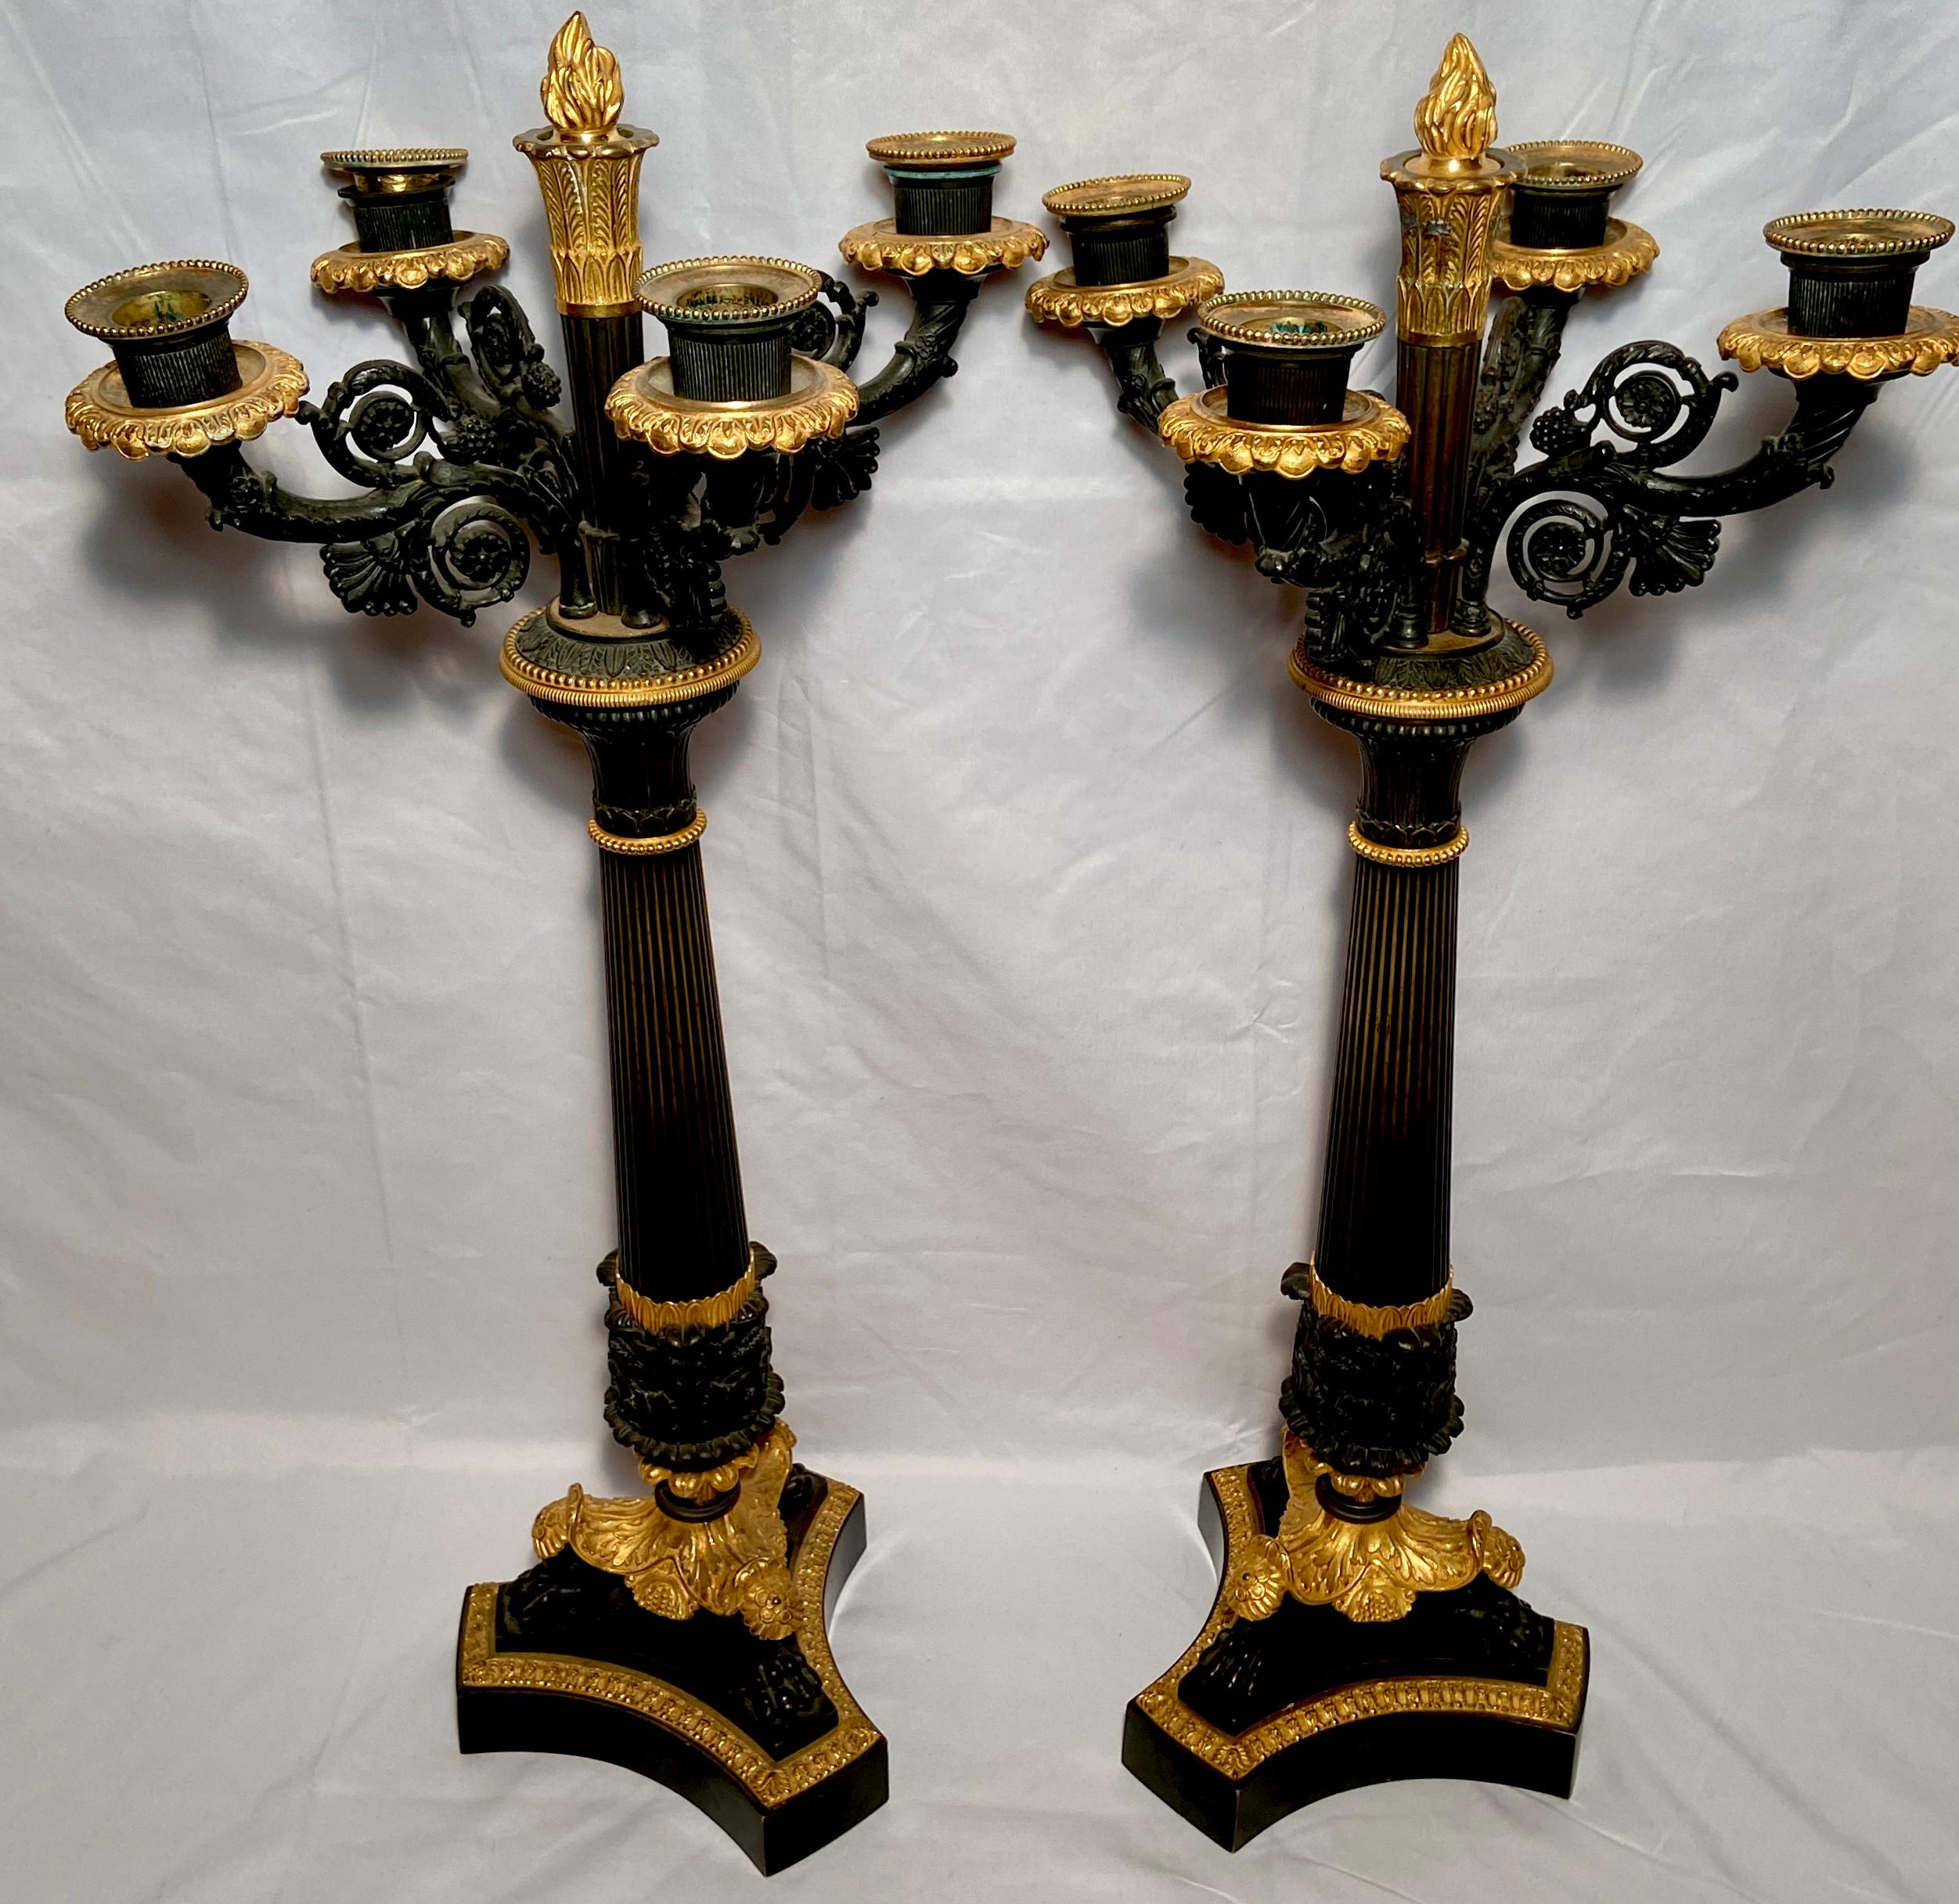 Pair antique French Empire patinated bronze & gold bronze candelabra, Circa 1860.
These handsome patinated candelabra would be a fine addition to any sideboard or large server. They have 4 arms.